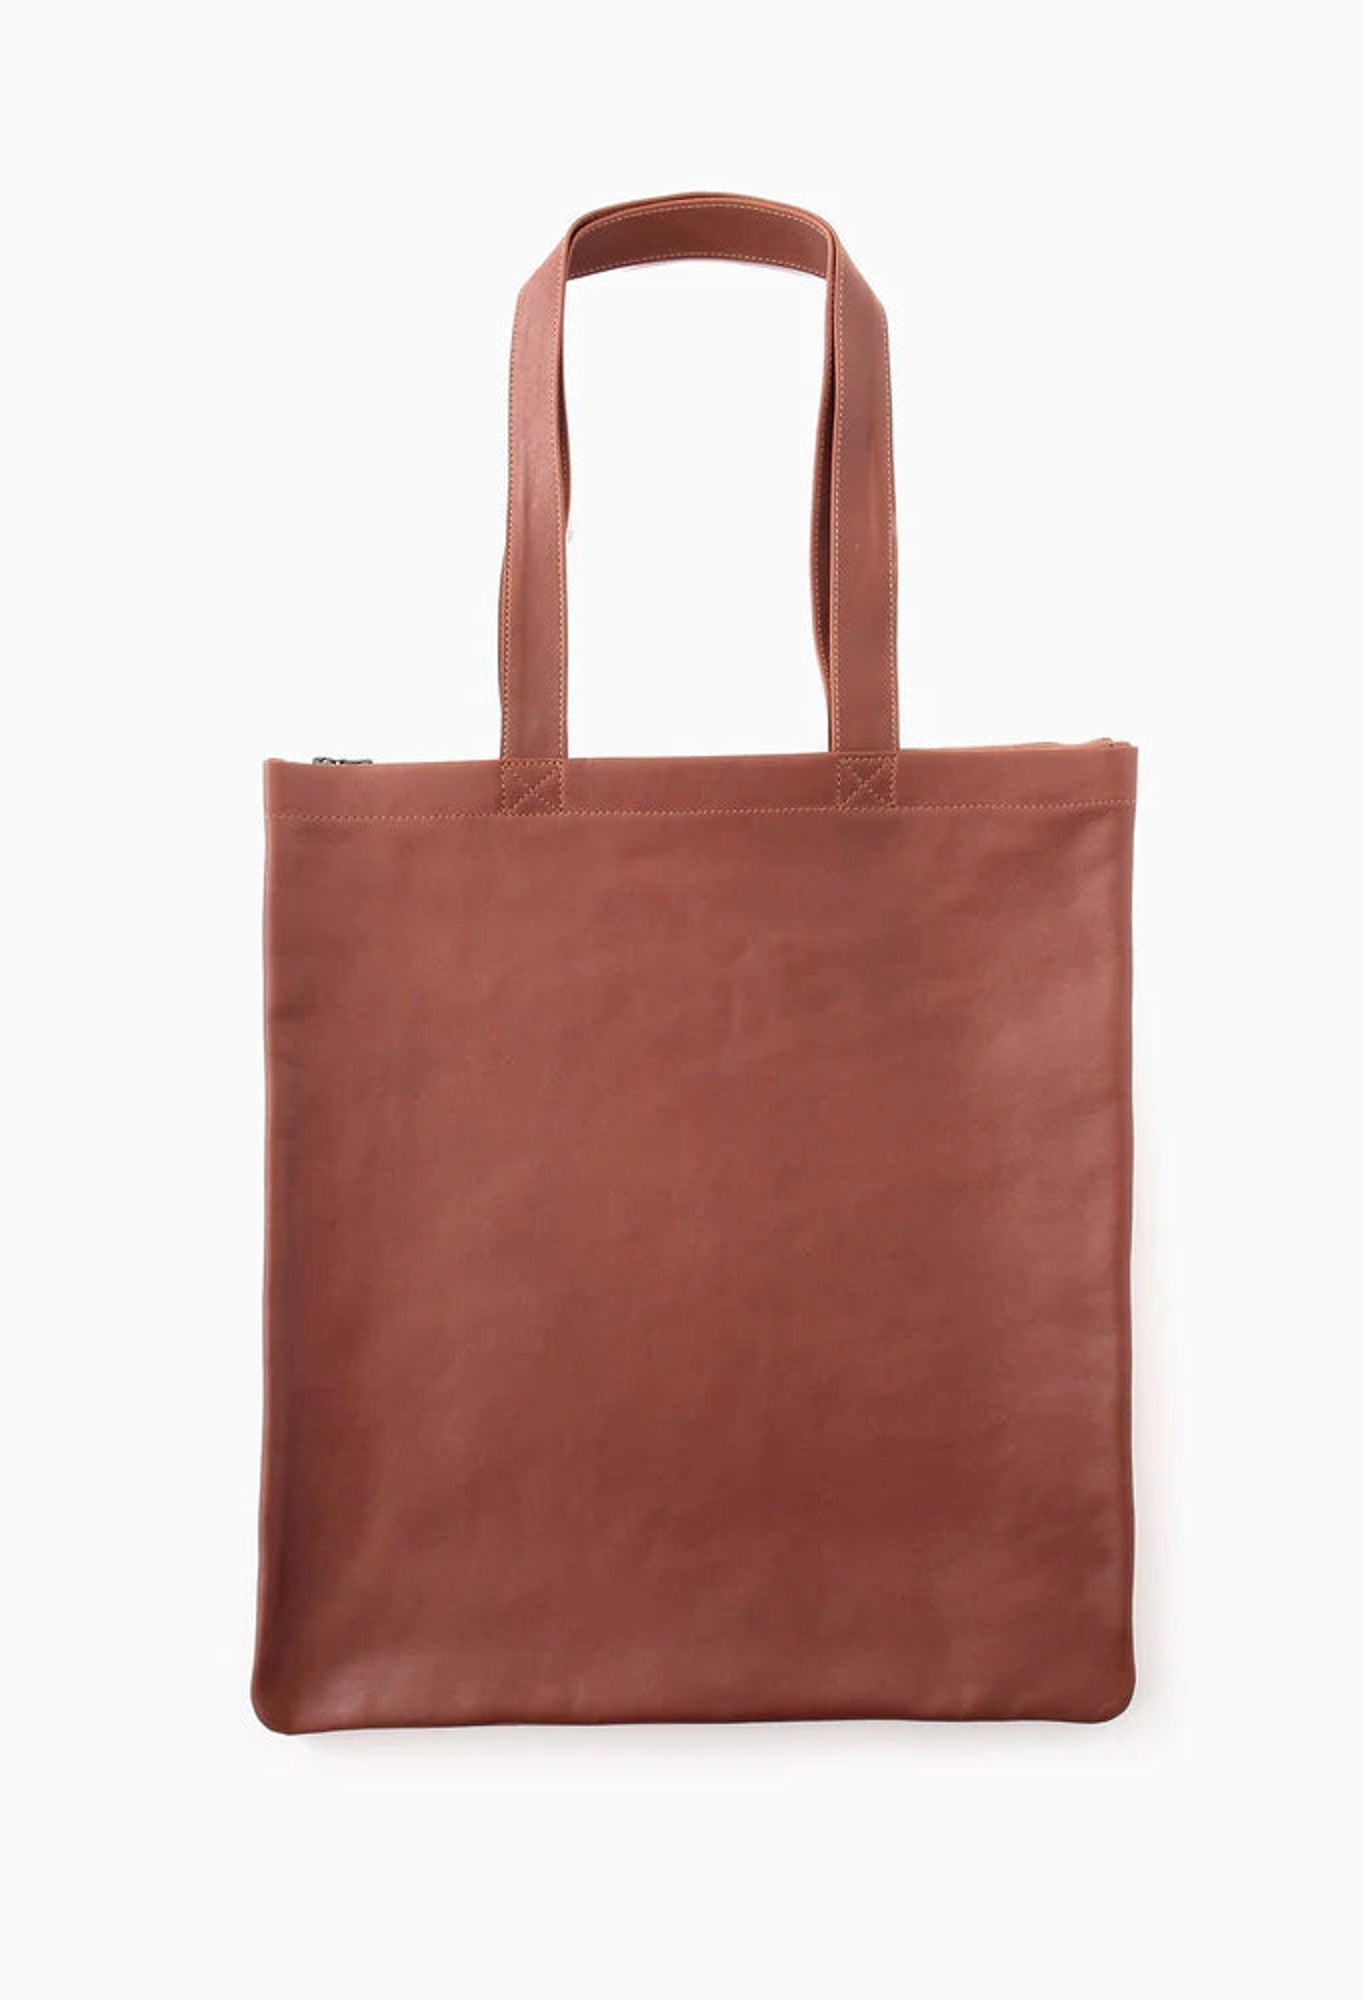 Penrose Tote Bag in Dark Brown Bridle Leather – J. Stark – Made in USA